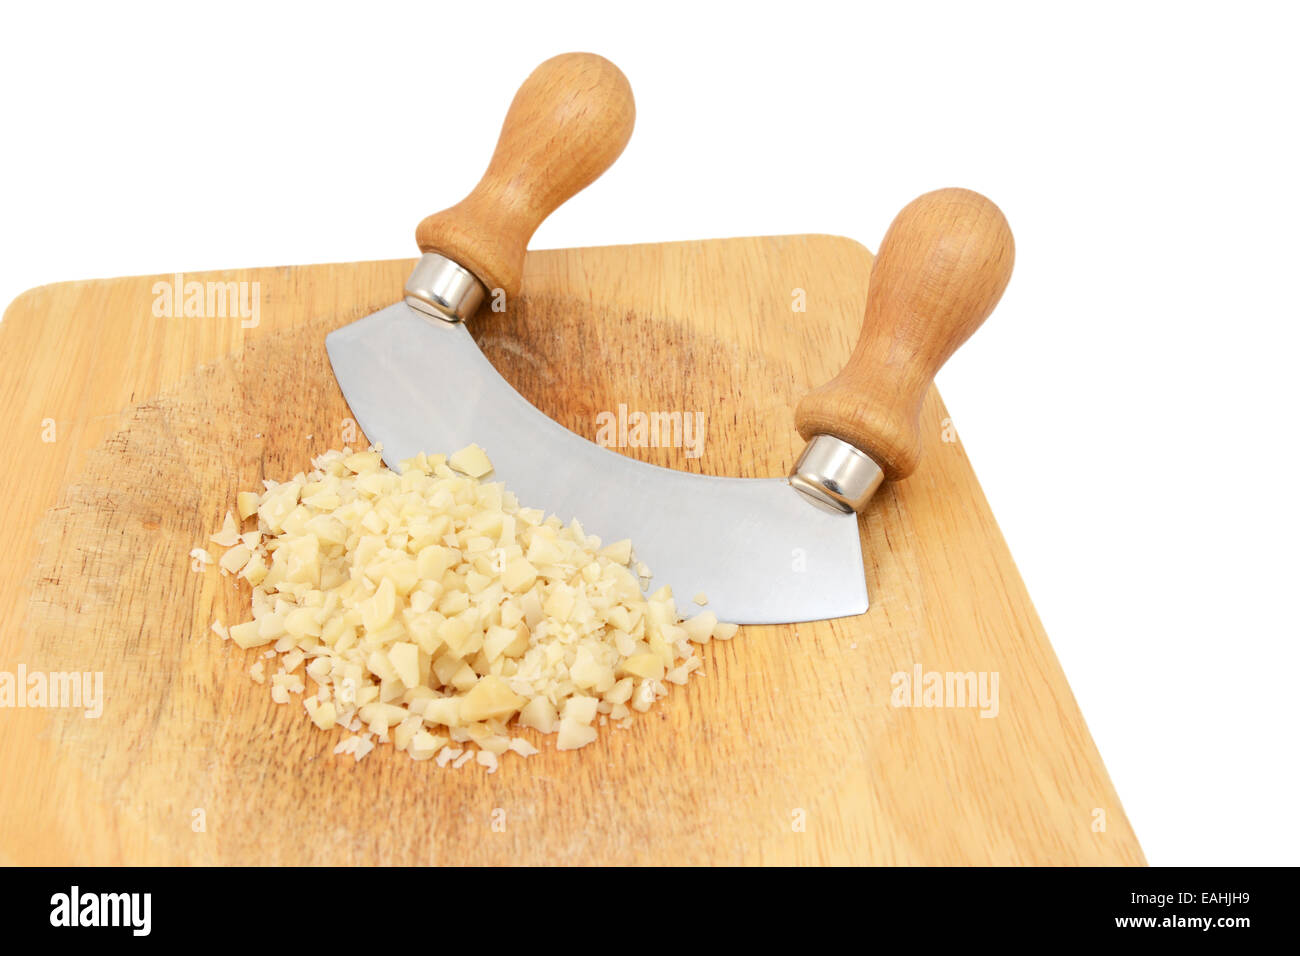 Finely chopped macadamia nuts with a rocking knife on a wooden chopping board, isolated on a white background Stock Photo